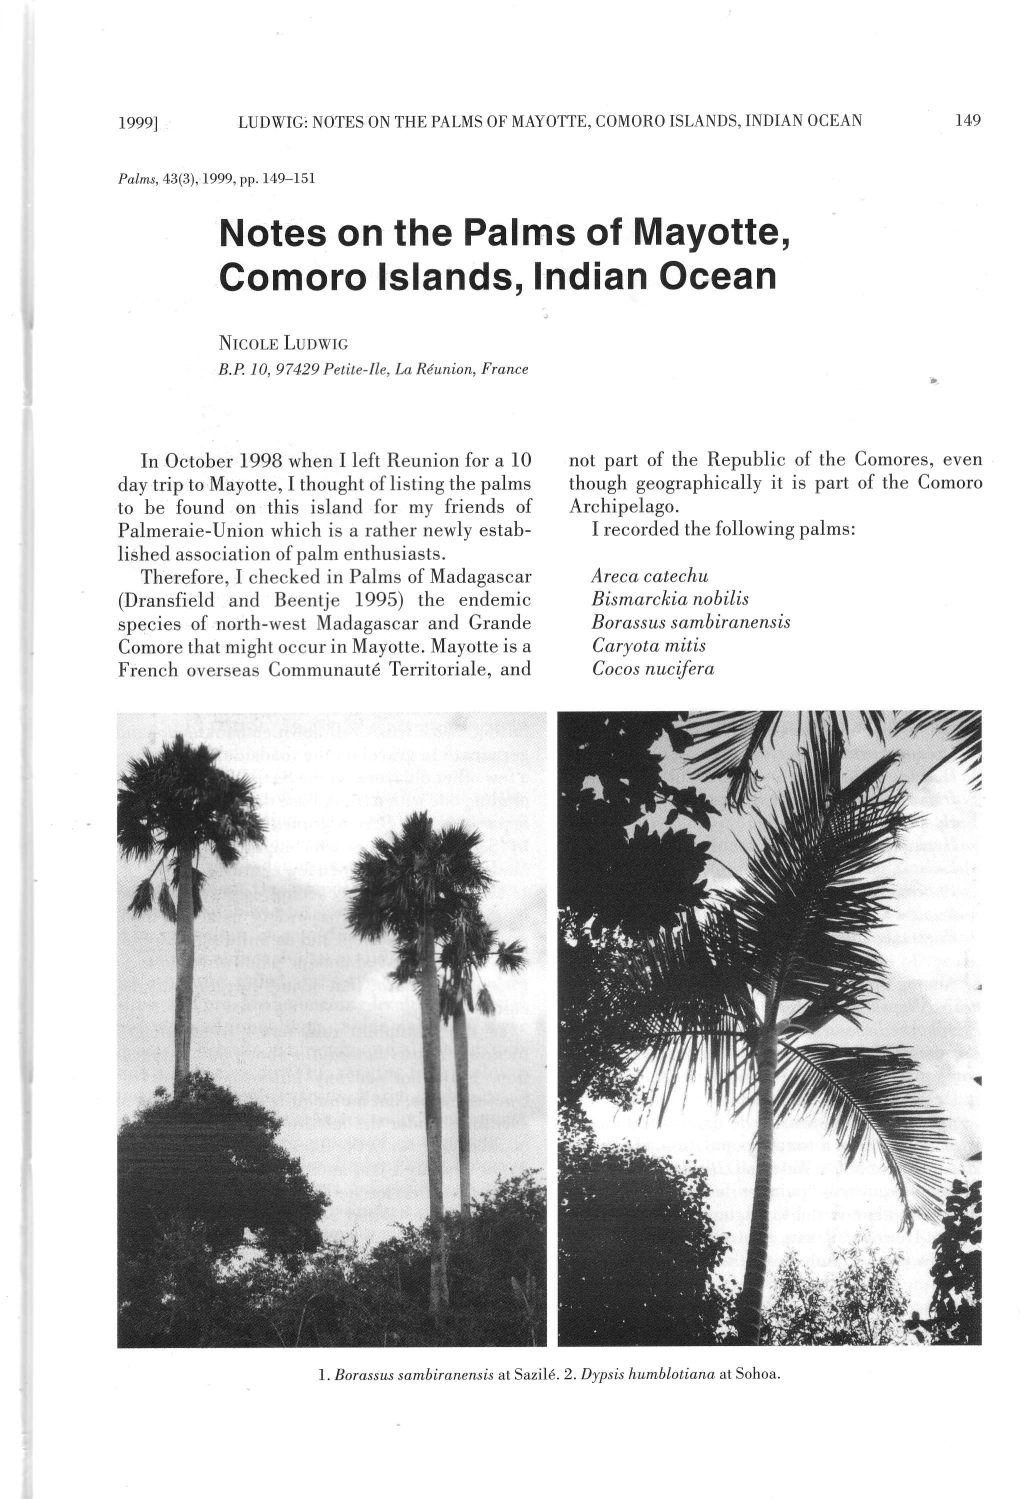 Notes on the Palms of Mayotte, Comoro Lslands, Indian Ocean